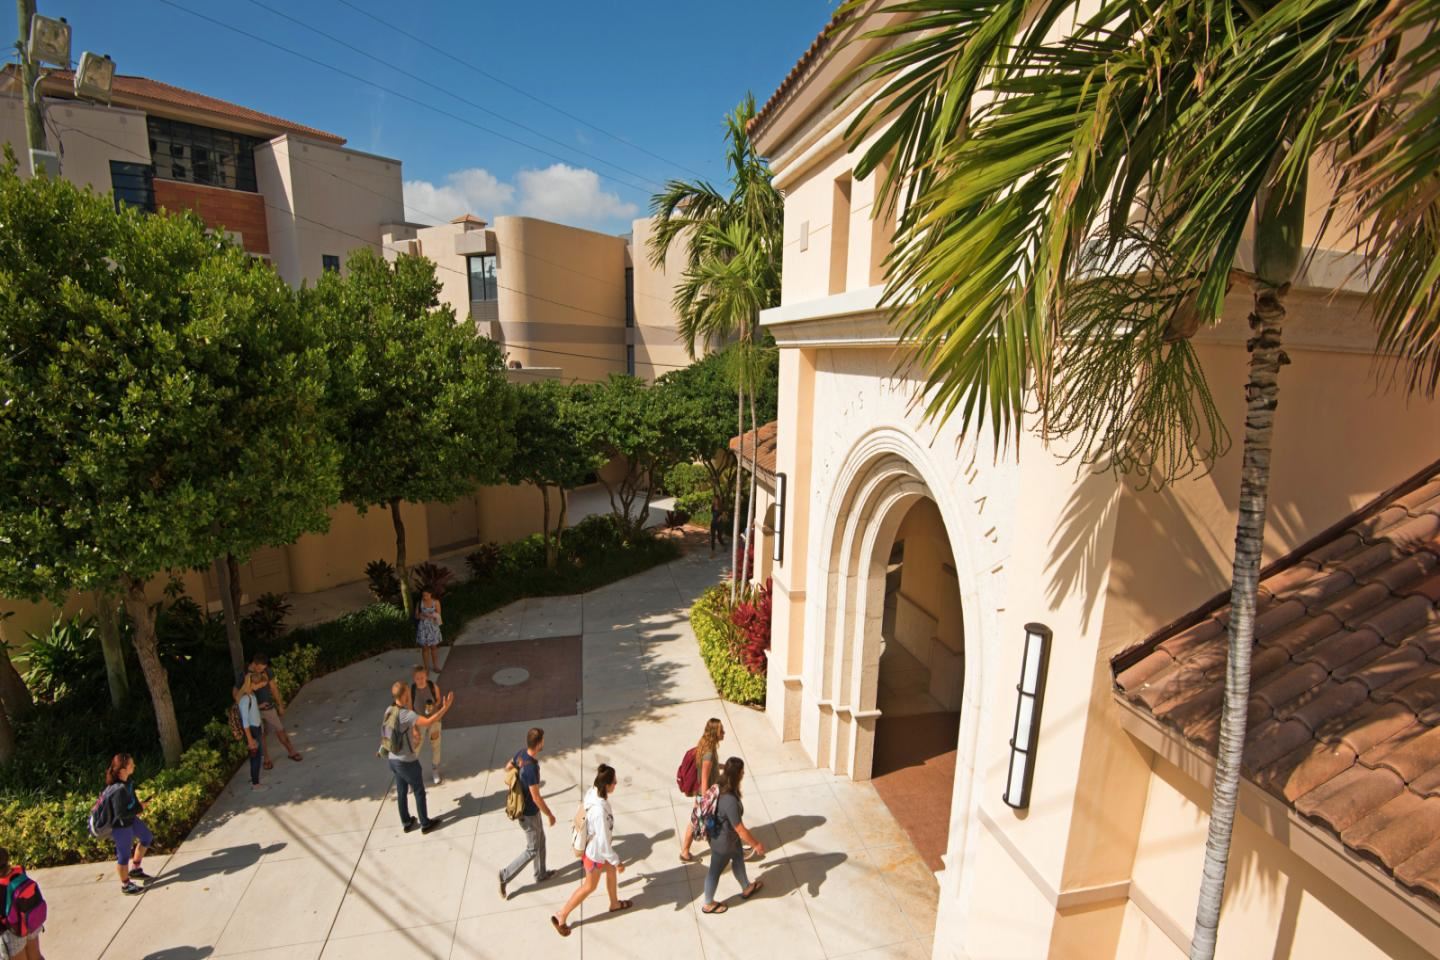 Christian Colleges in Florida 10 Schools You Should Consider